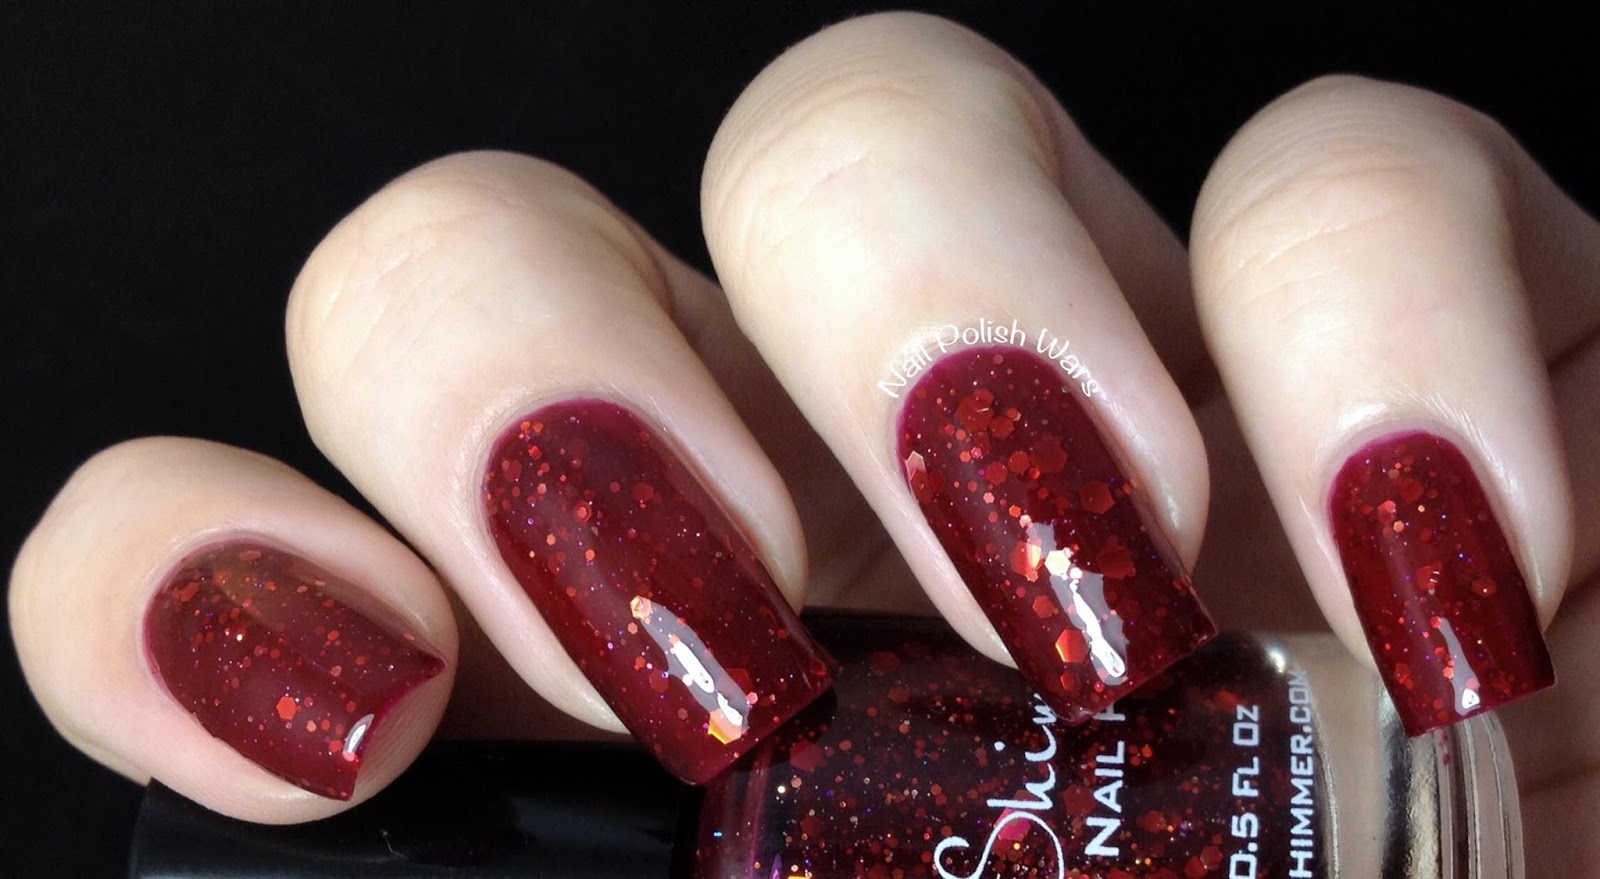 Nail Polish Wars: KBShimmer - Fall 2014 Collection Swatch & Review